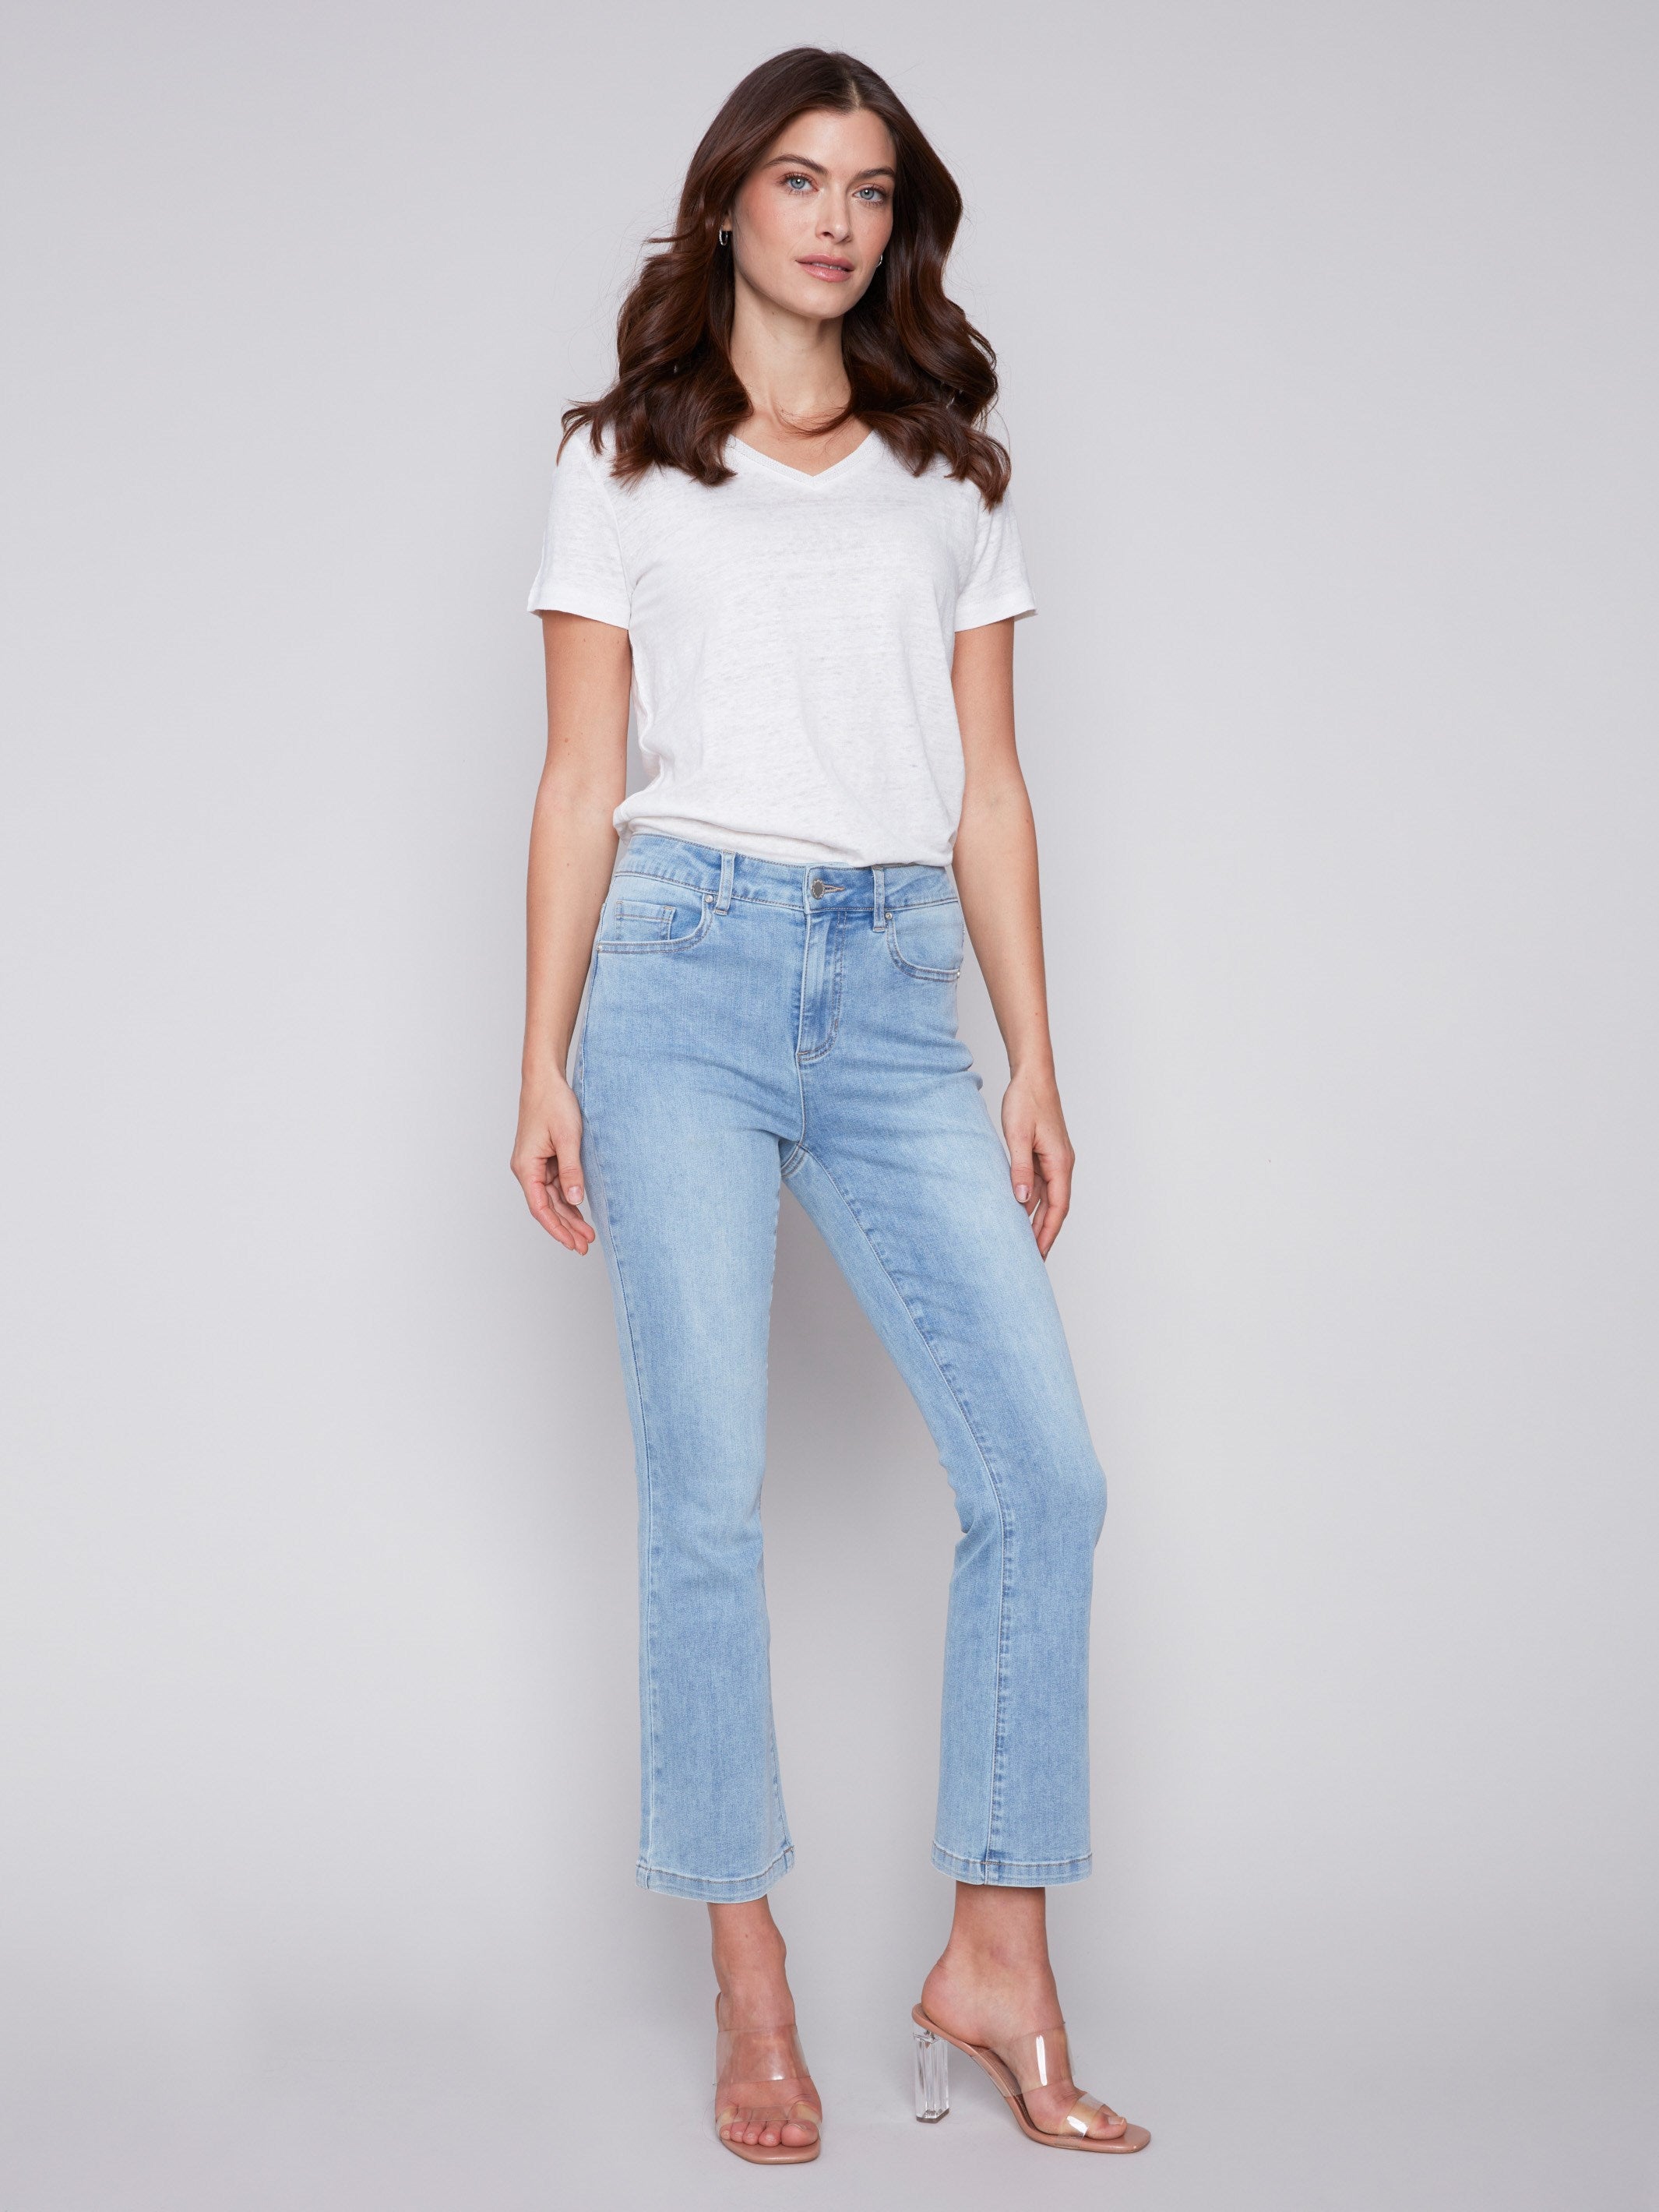 Bootcut Stretch Denim Pants - Light Blue - Charlie B Collection Canada - Image 4